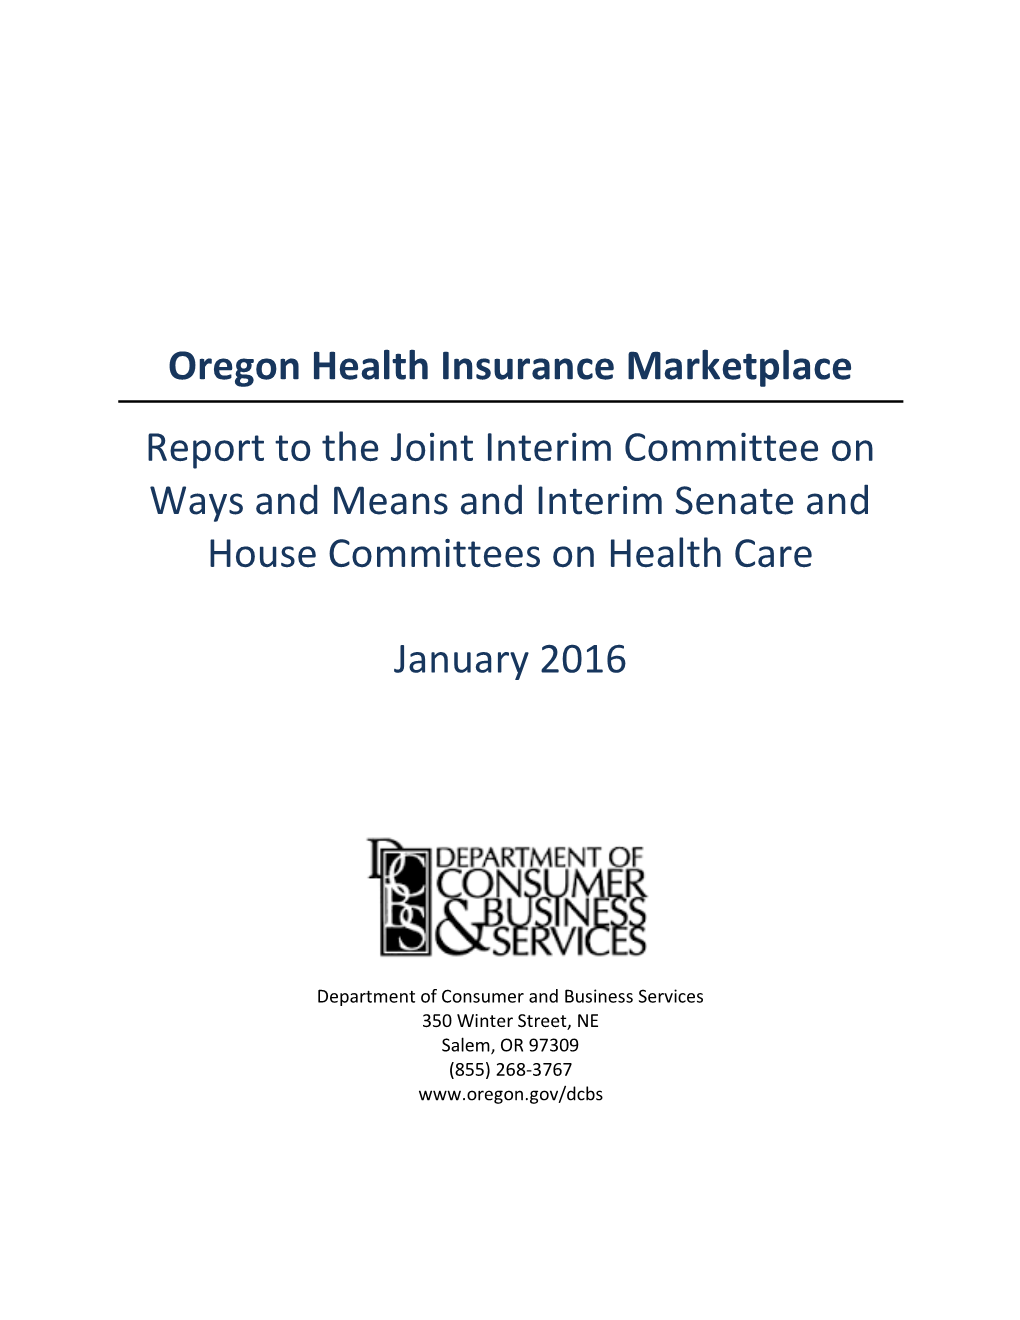 Oregon Health Insurance Marketplace Report to the Joint Interim Committee on Ways and Means and Interim Senate and House Committees on Health Care January 2016